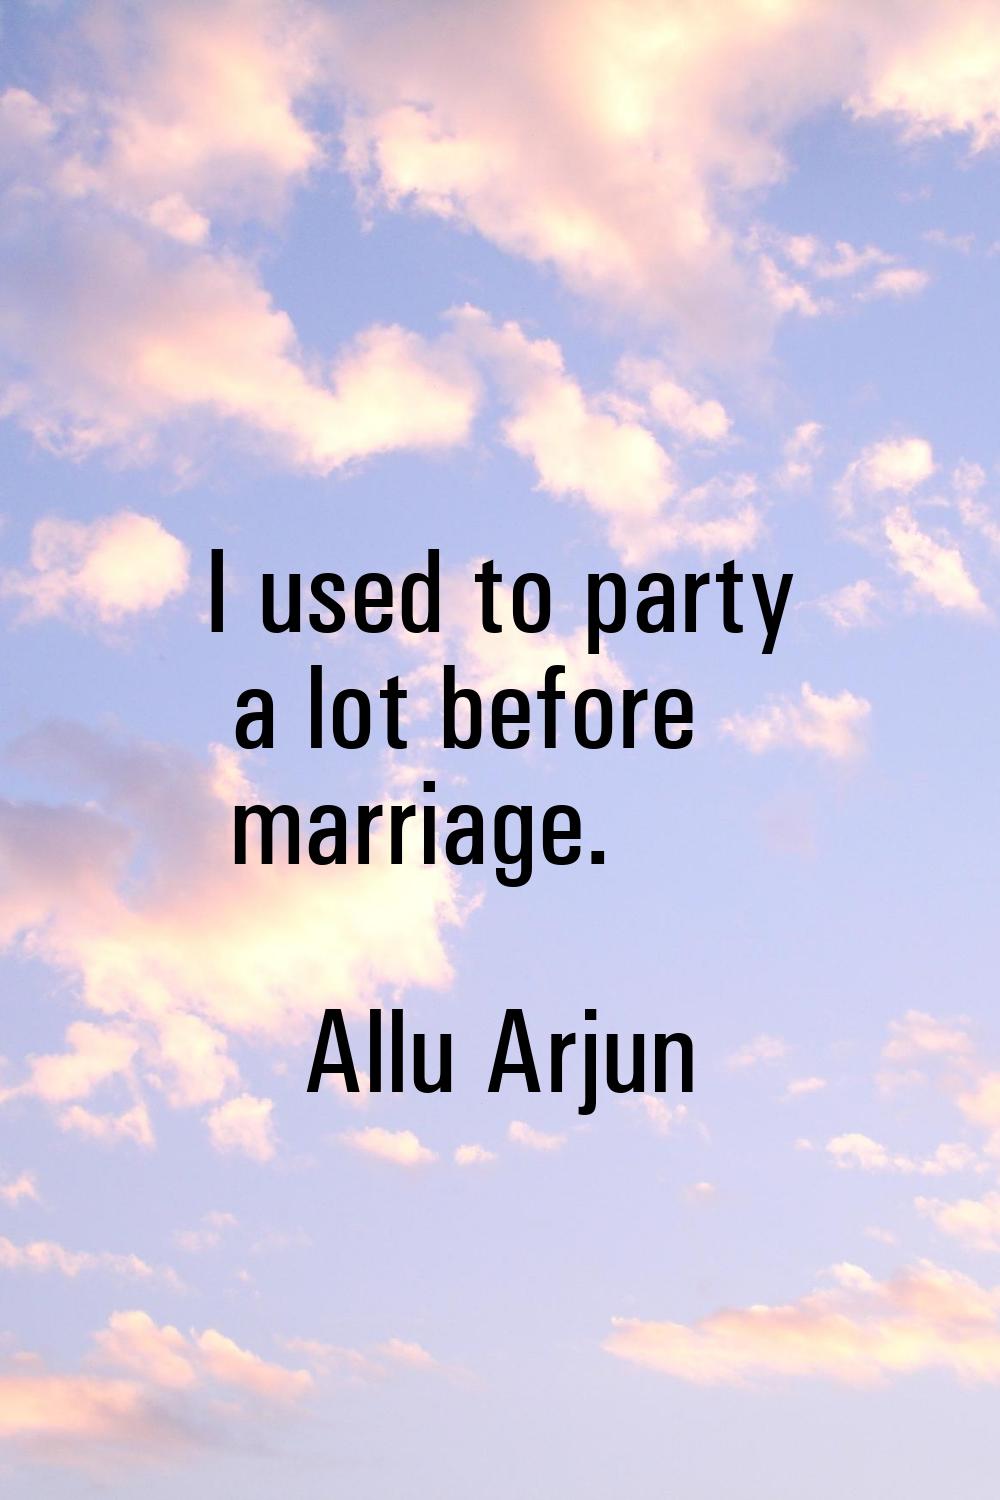 I used to party a lot before marriage.